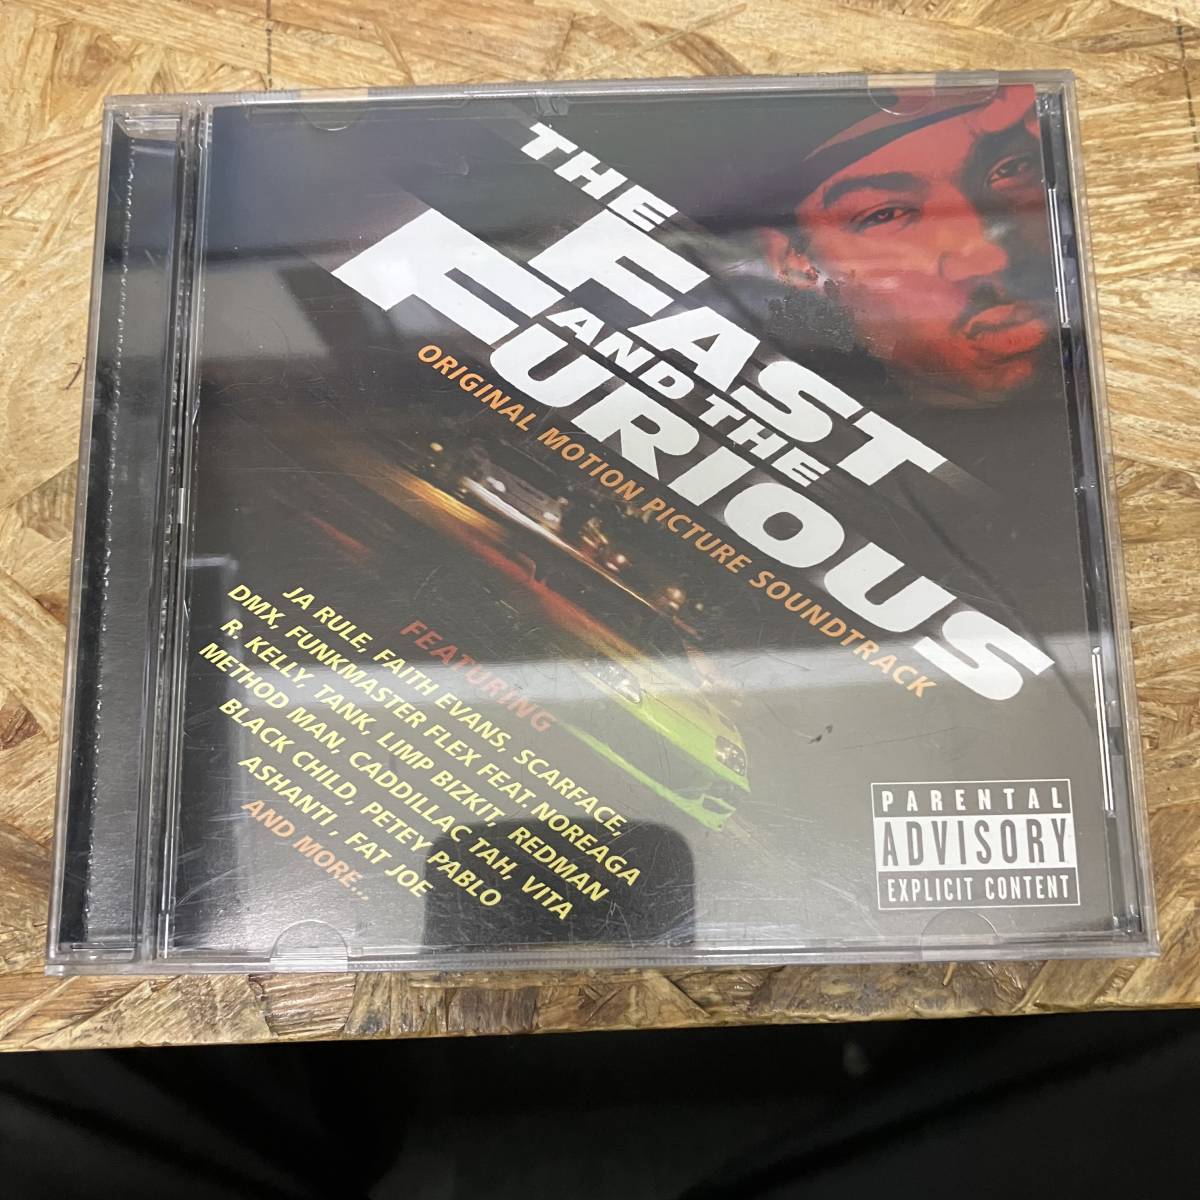 ● HIPHOP,R&B THE FAST AND THE FURIOUS アルバム,サントラ曲! CD 中古品_画像1